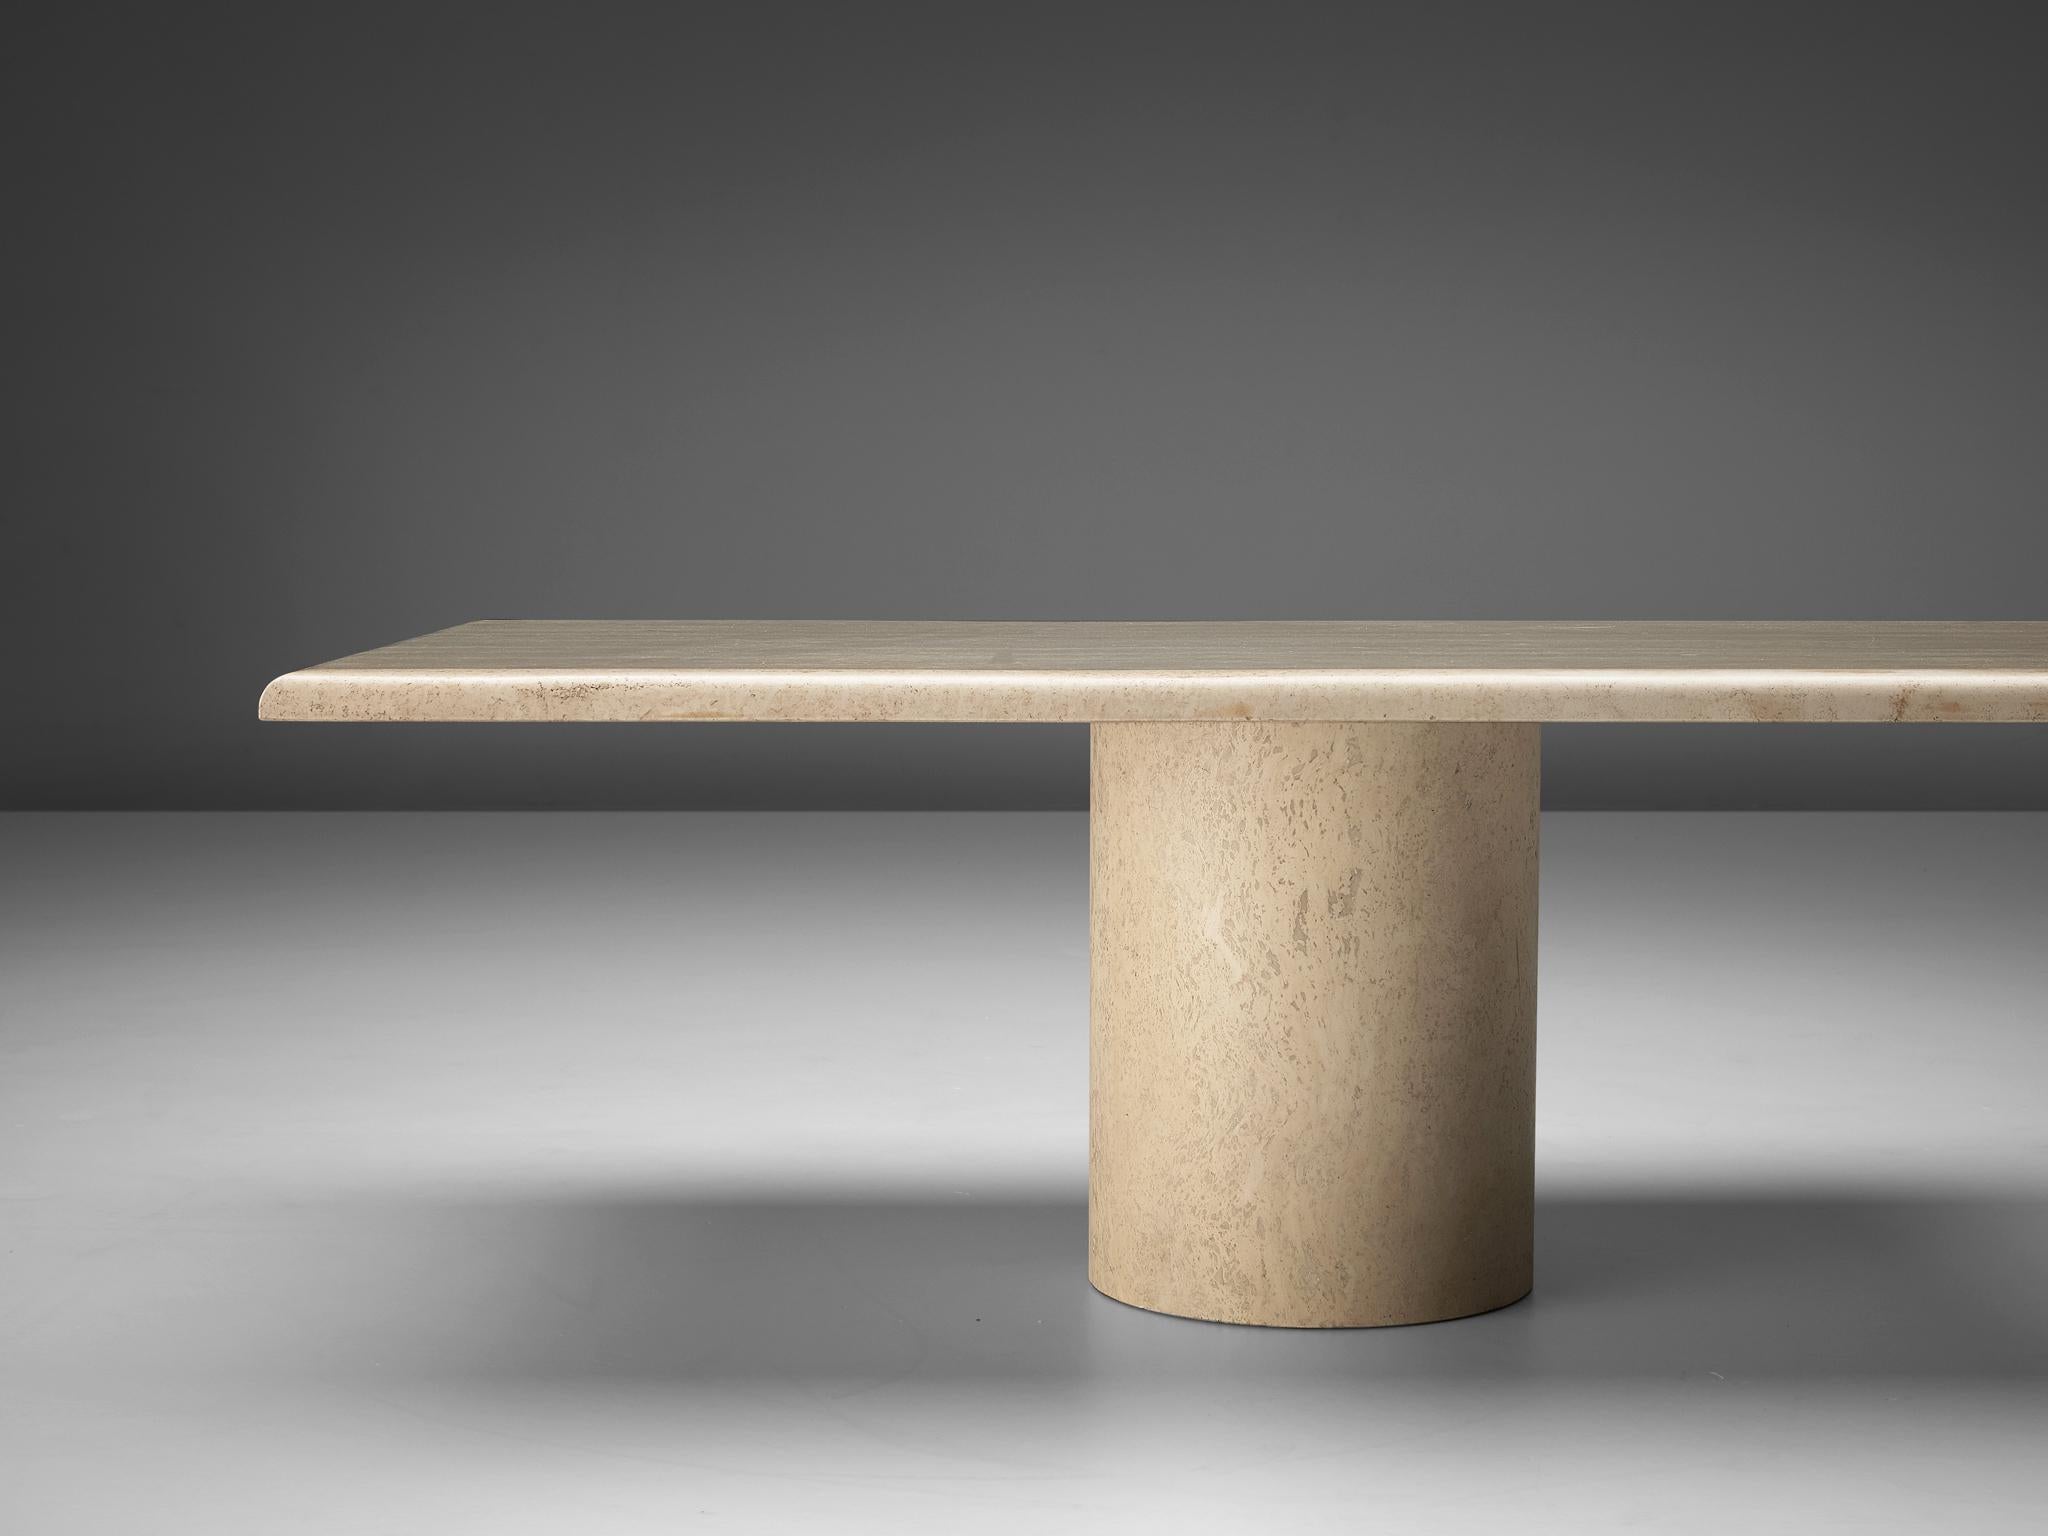 Coffee table, travertine, Italy, 1970s

With a travertine angular tabletop and a strong cylindric travertine base this pedestal coffee table shows a minimalistic design. The bright travertine gives the table a sculptural look. The natural layers